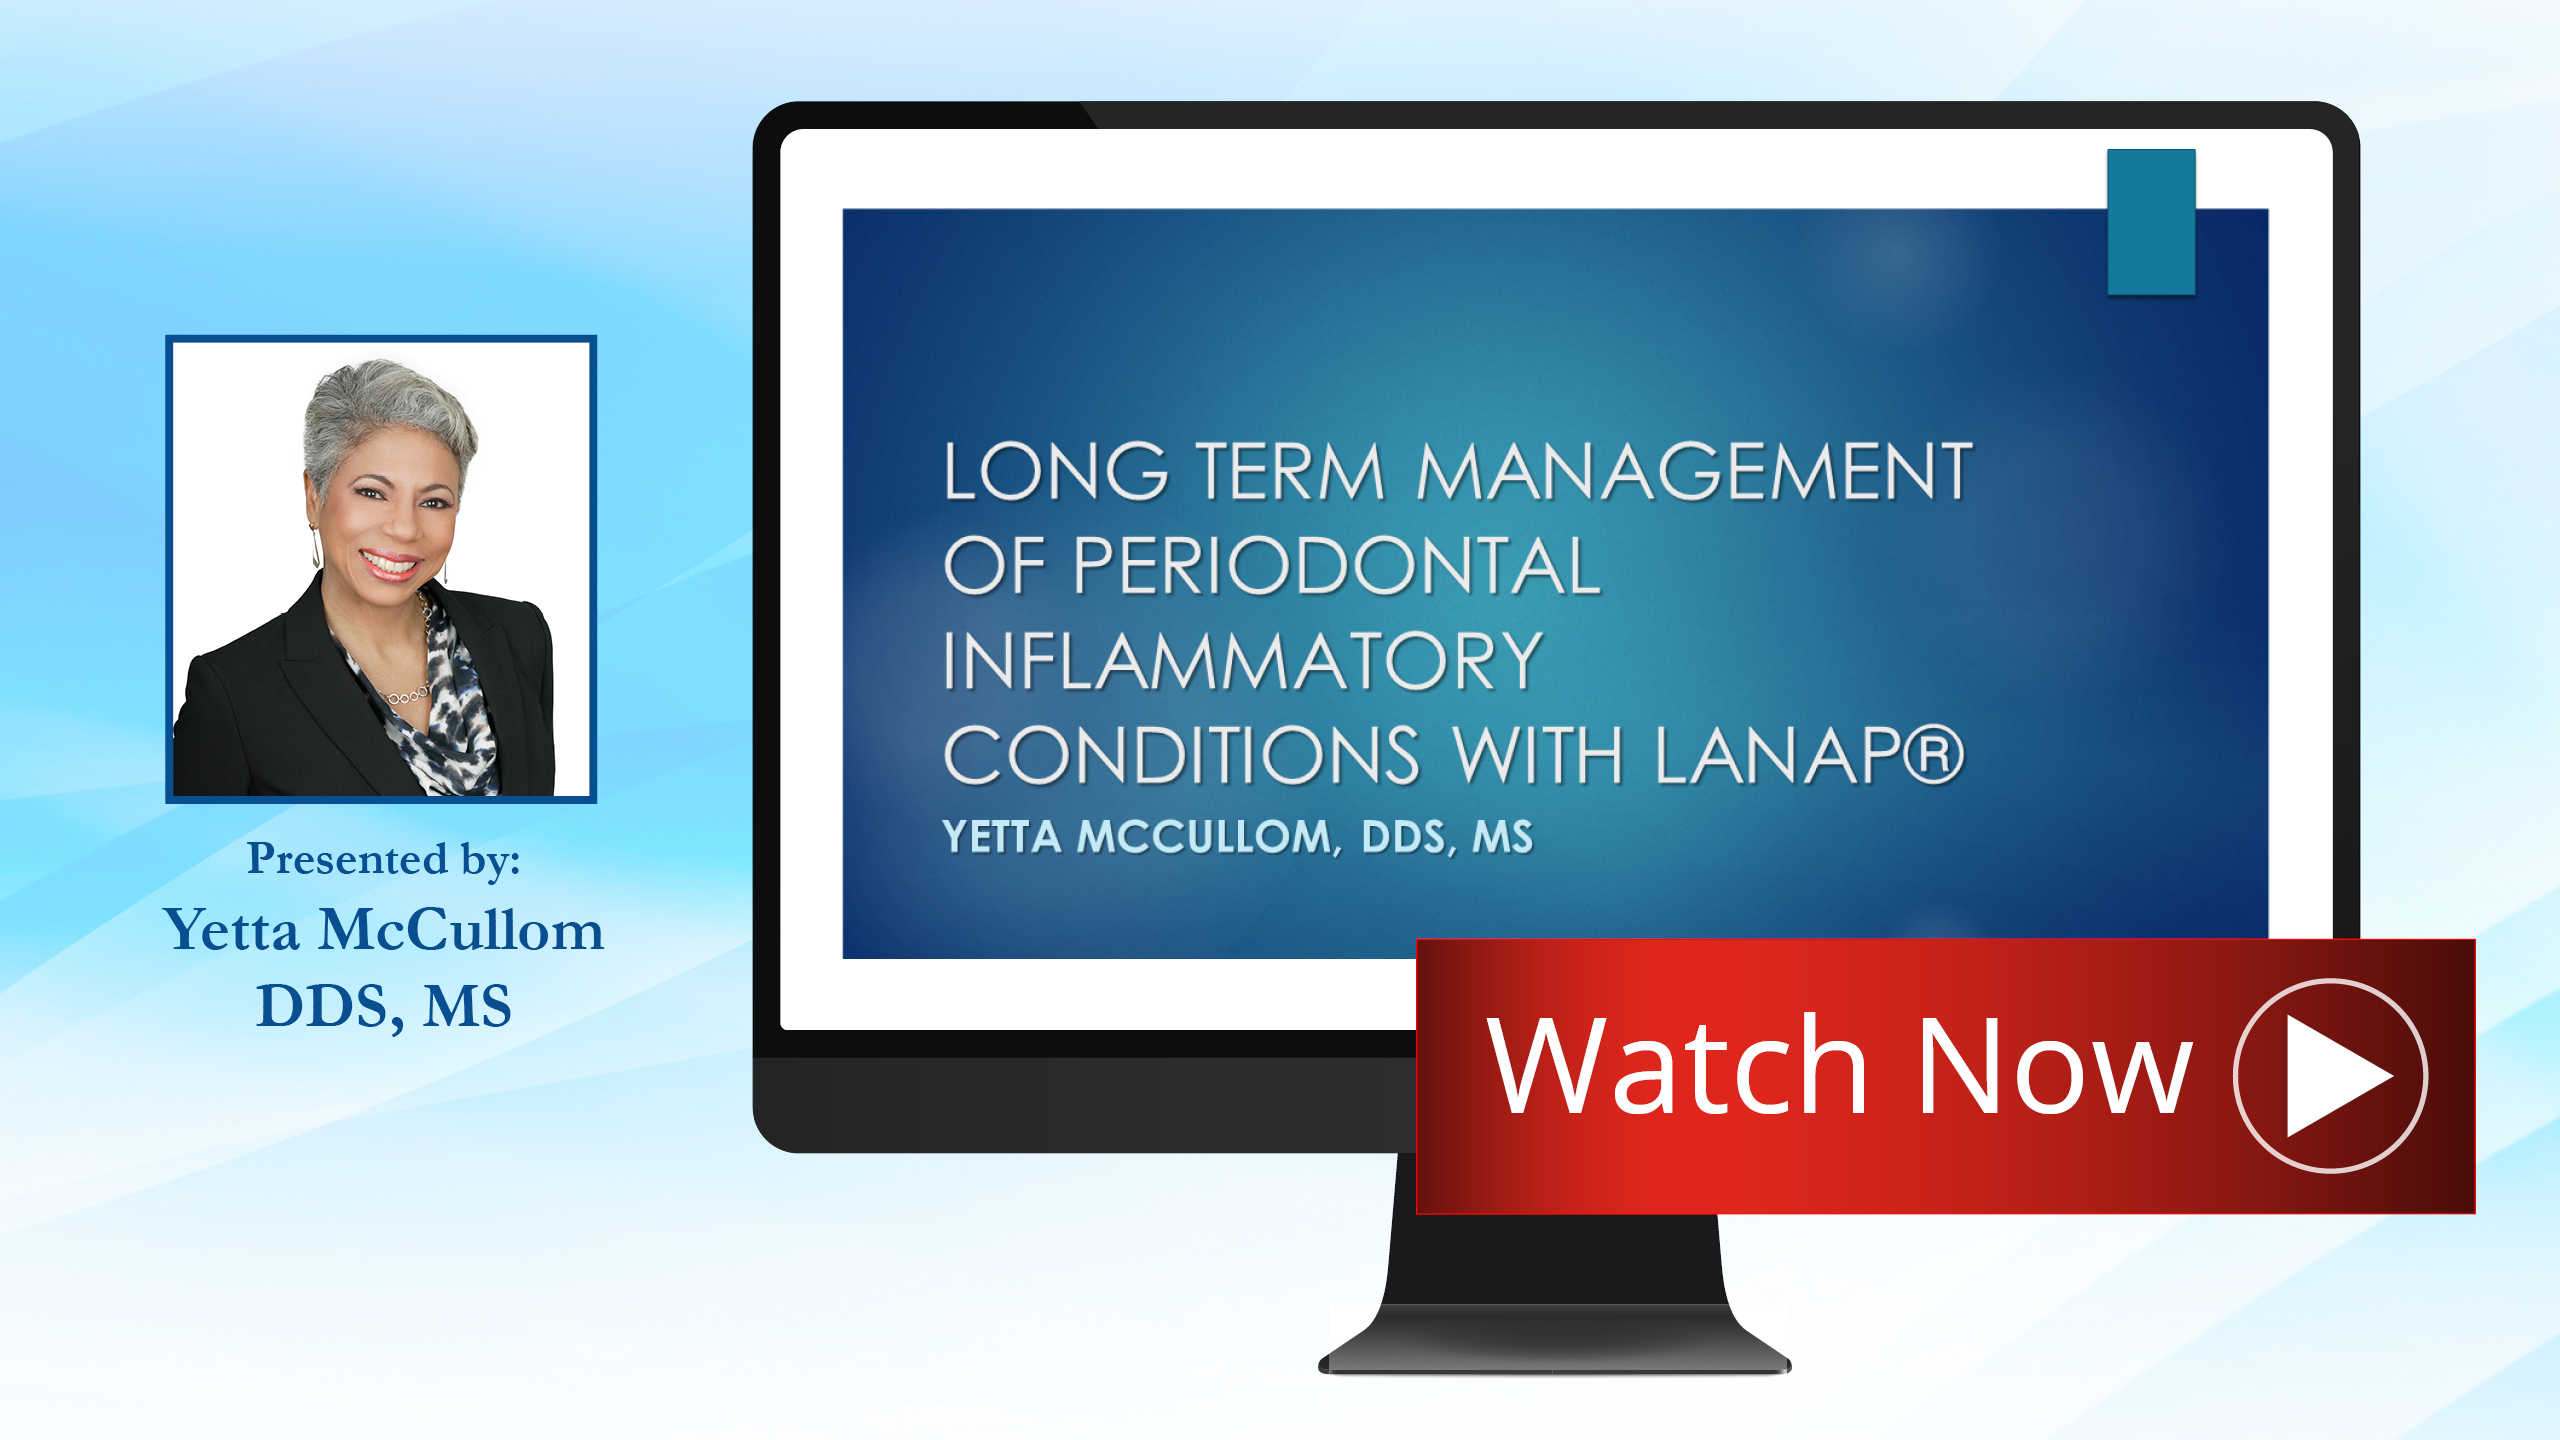 Long Term Management of Periodontal Inflammatory Conditions with LANAP